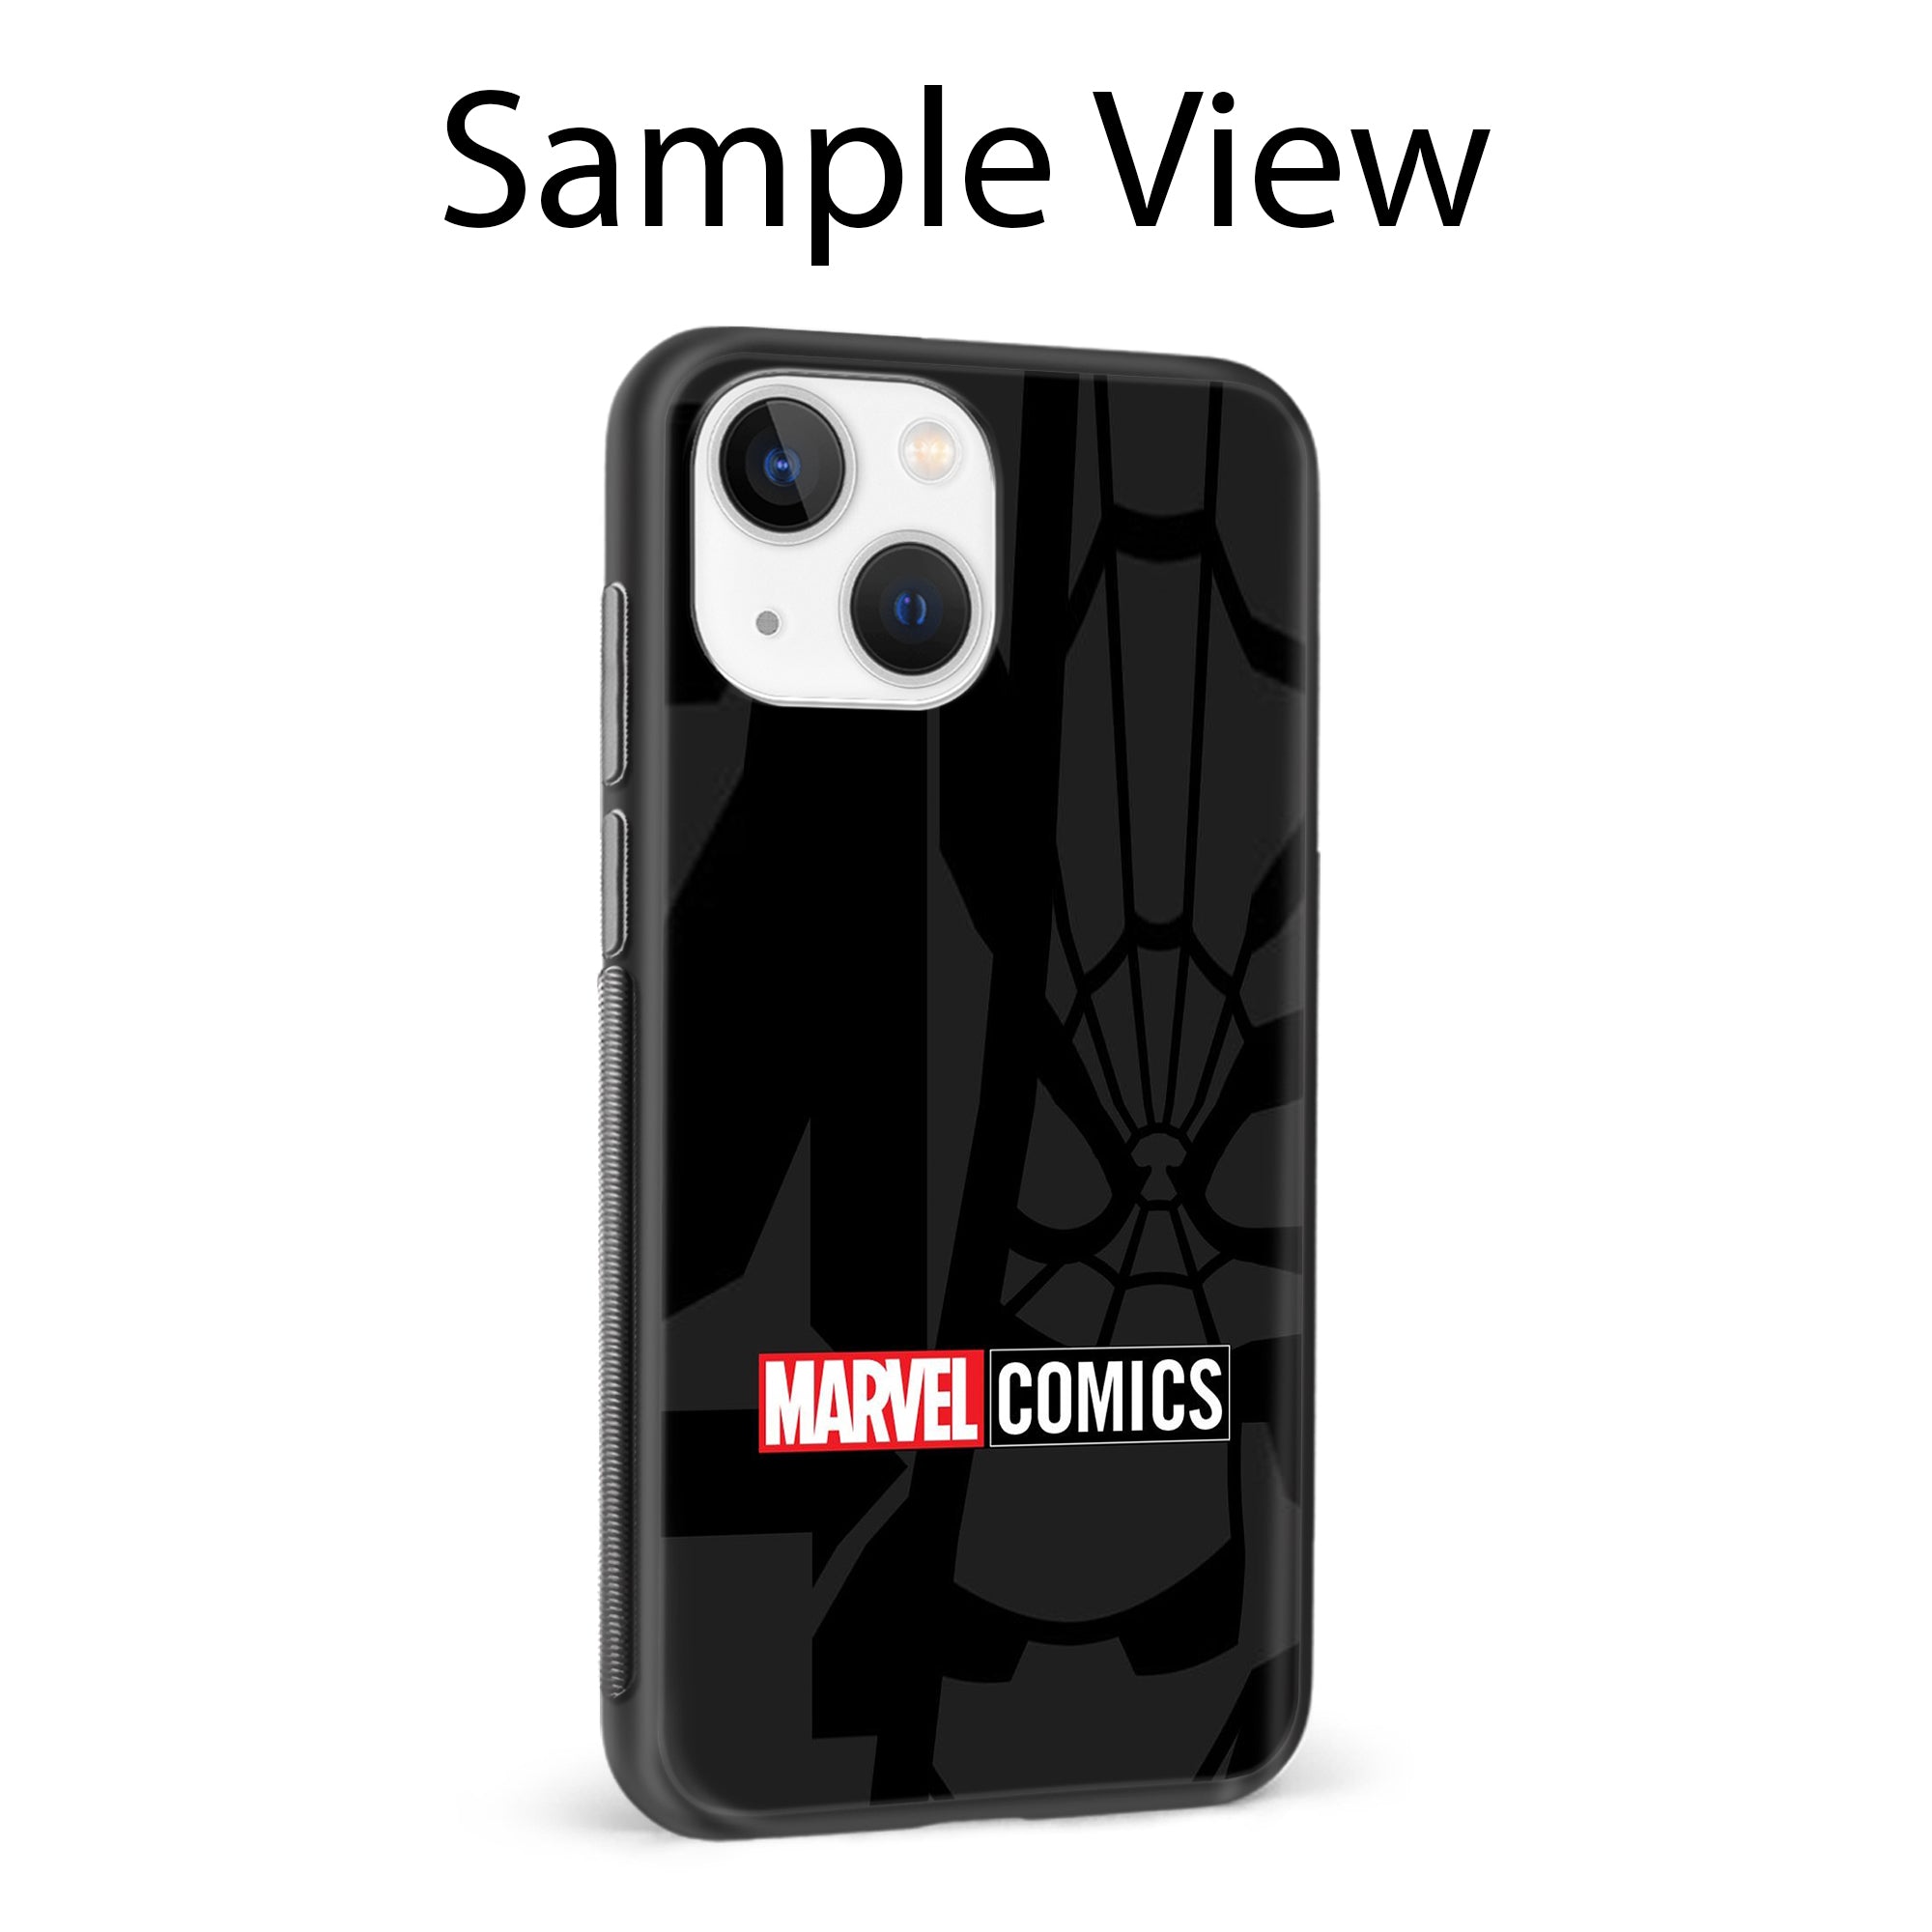 Buy Marvel Comics Glass/Metal Back Mobile Phone Case/Cover For iPhone 11 Pro Online